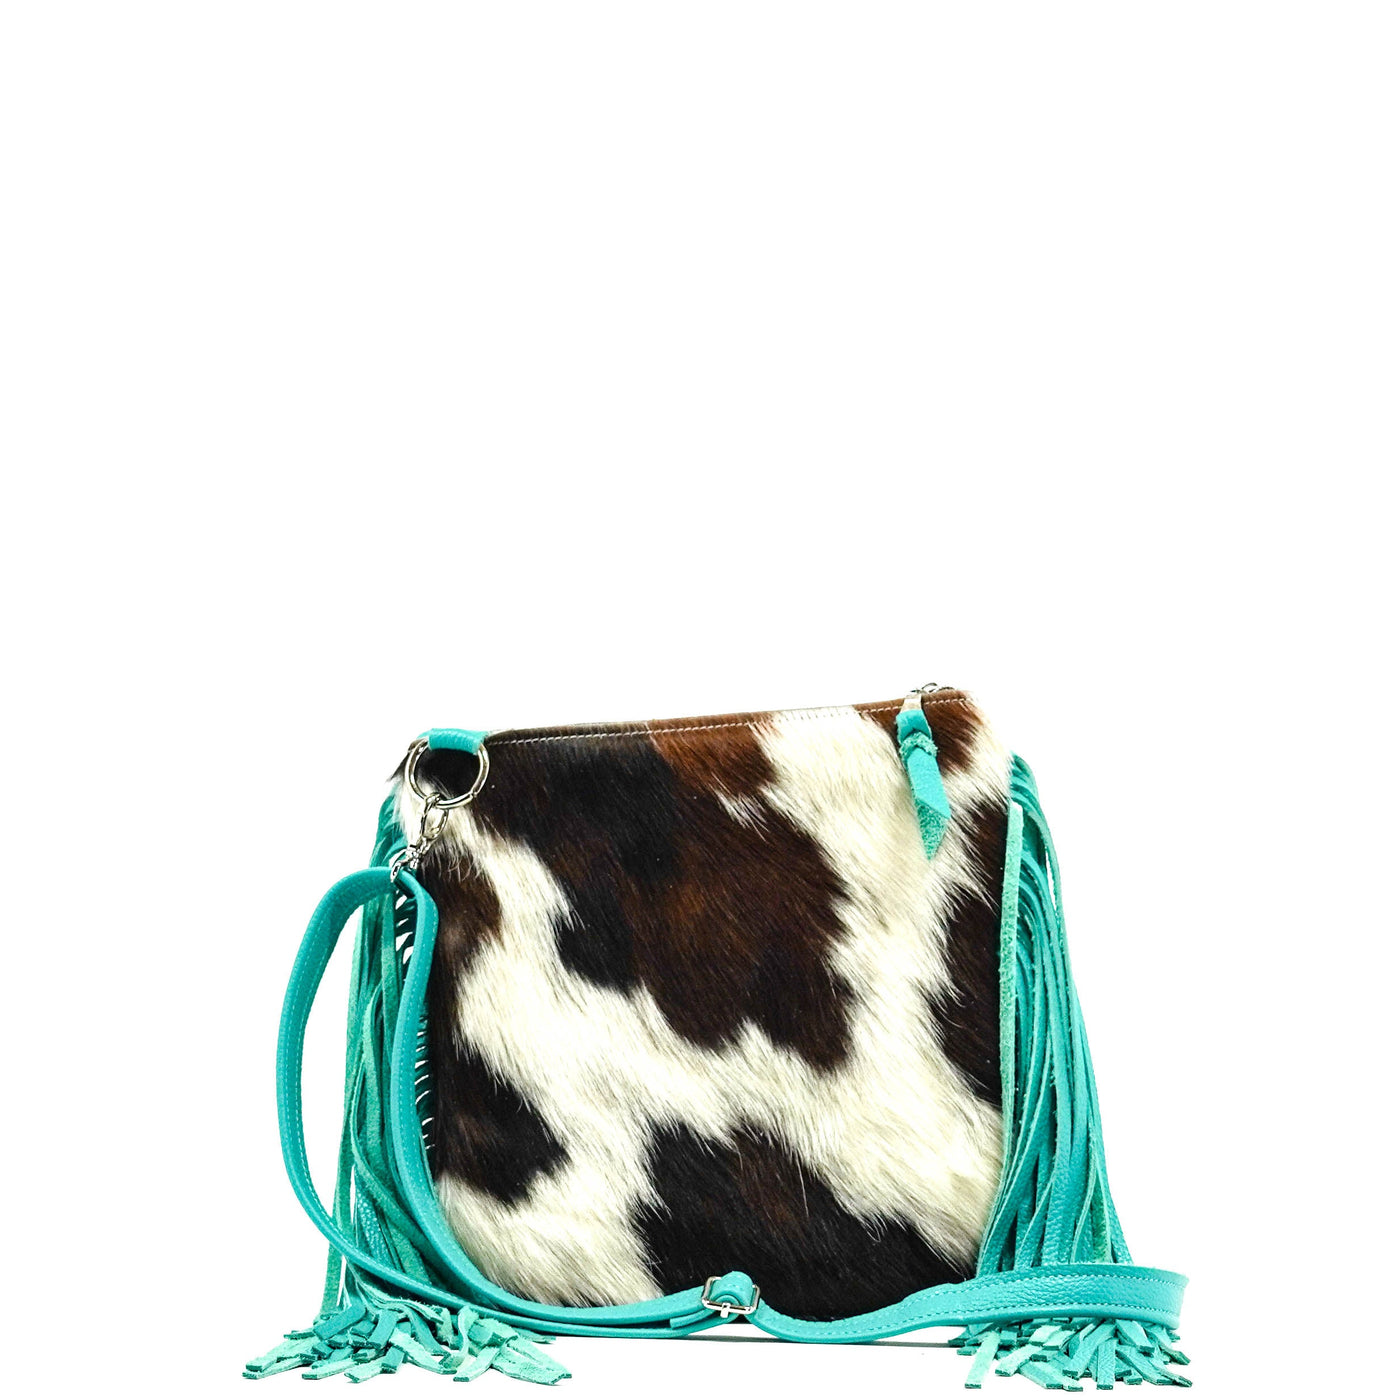 Shania - Tricolor w/ No Embossed-Shania-Western-Cowhide-Bags-Handmade-Products-Gifts-Dancing Cactus Designs